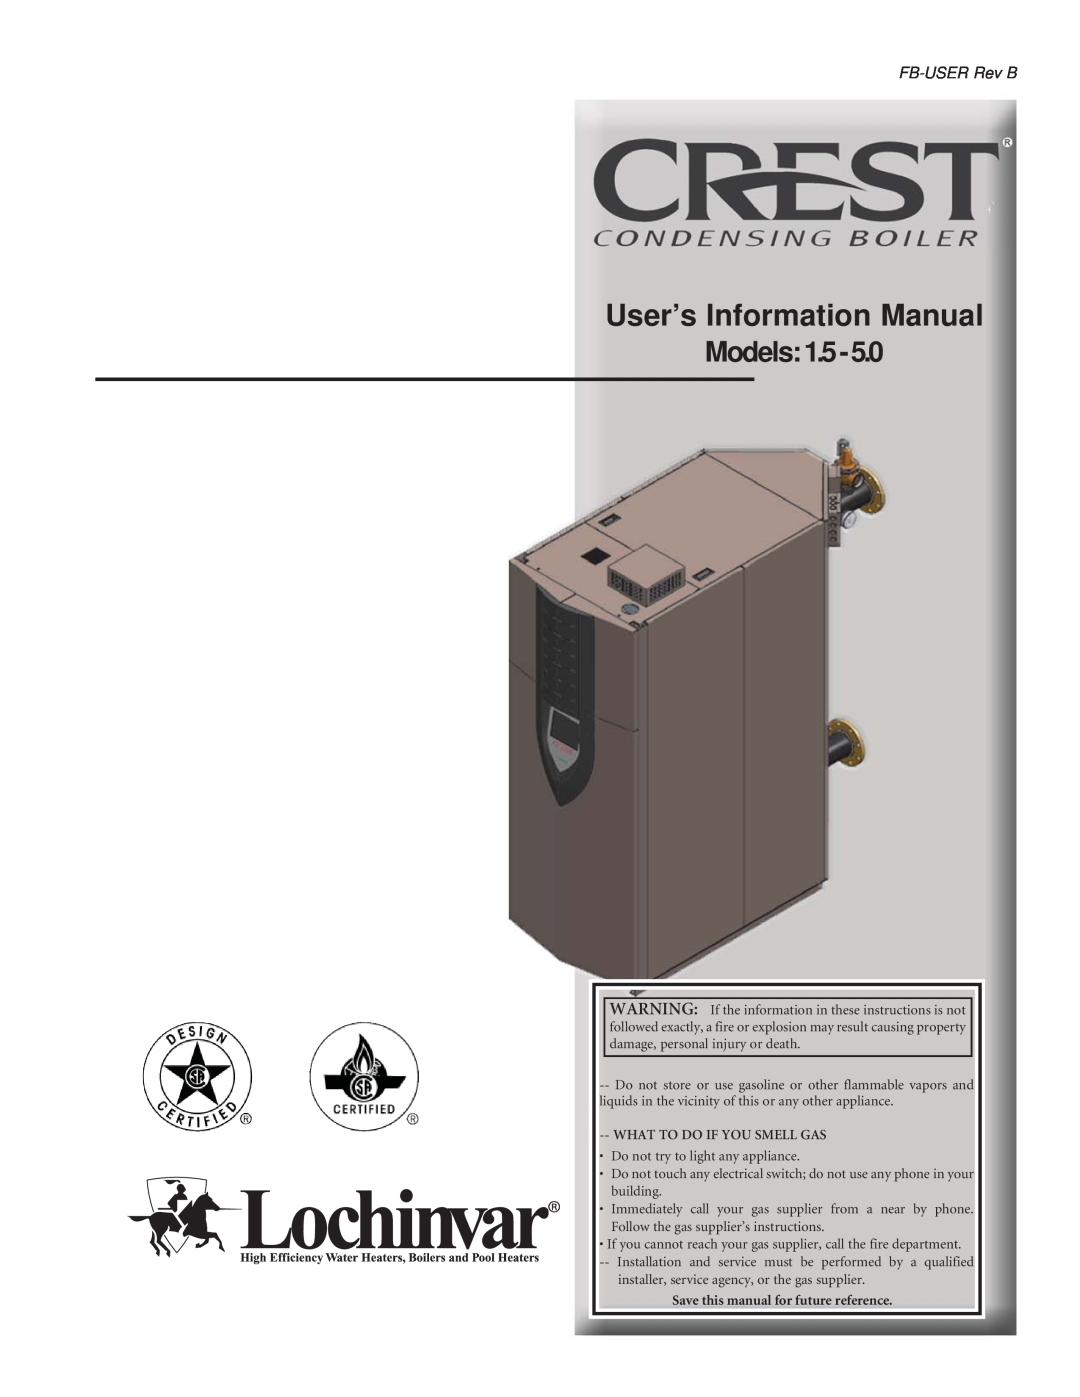 Lochinvar 5 operation manual Save this manual for future reference, SYNC-I-ORev N 